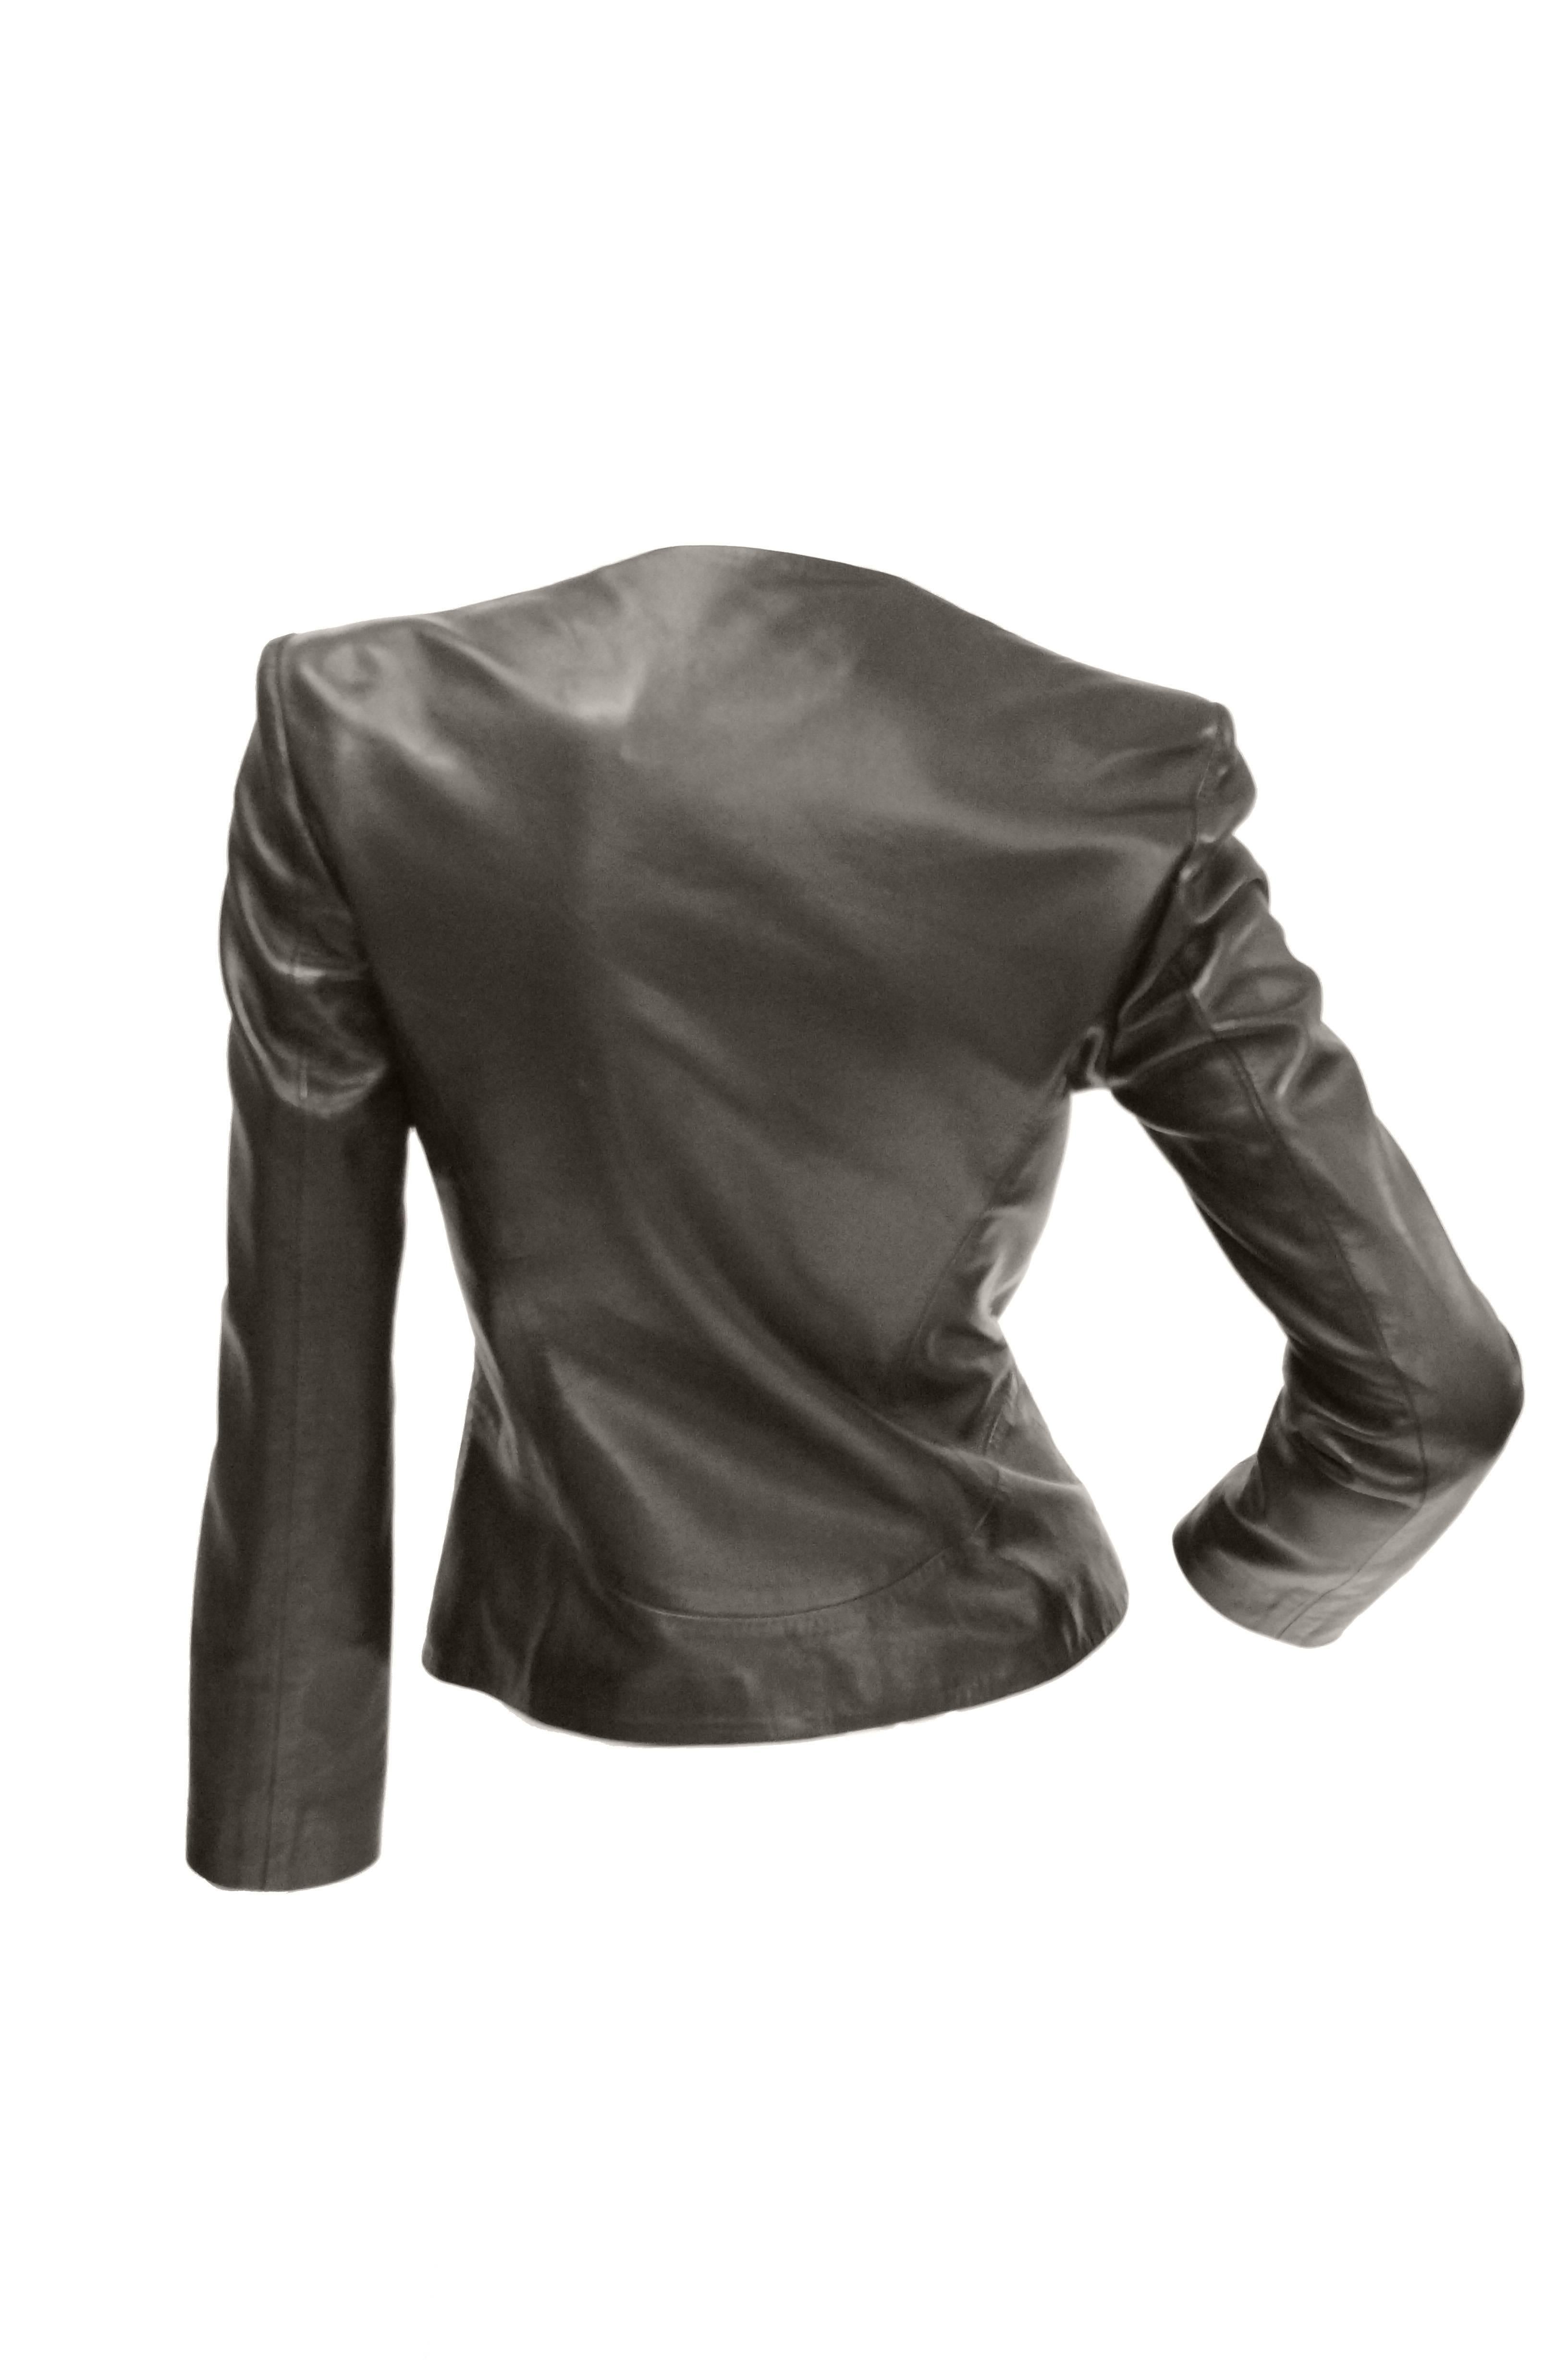 Women's Early 1980s Gianni Versace Bistre Brown Kidskin Leather Jacket 0-2 For Sale